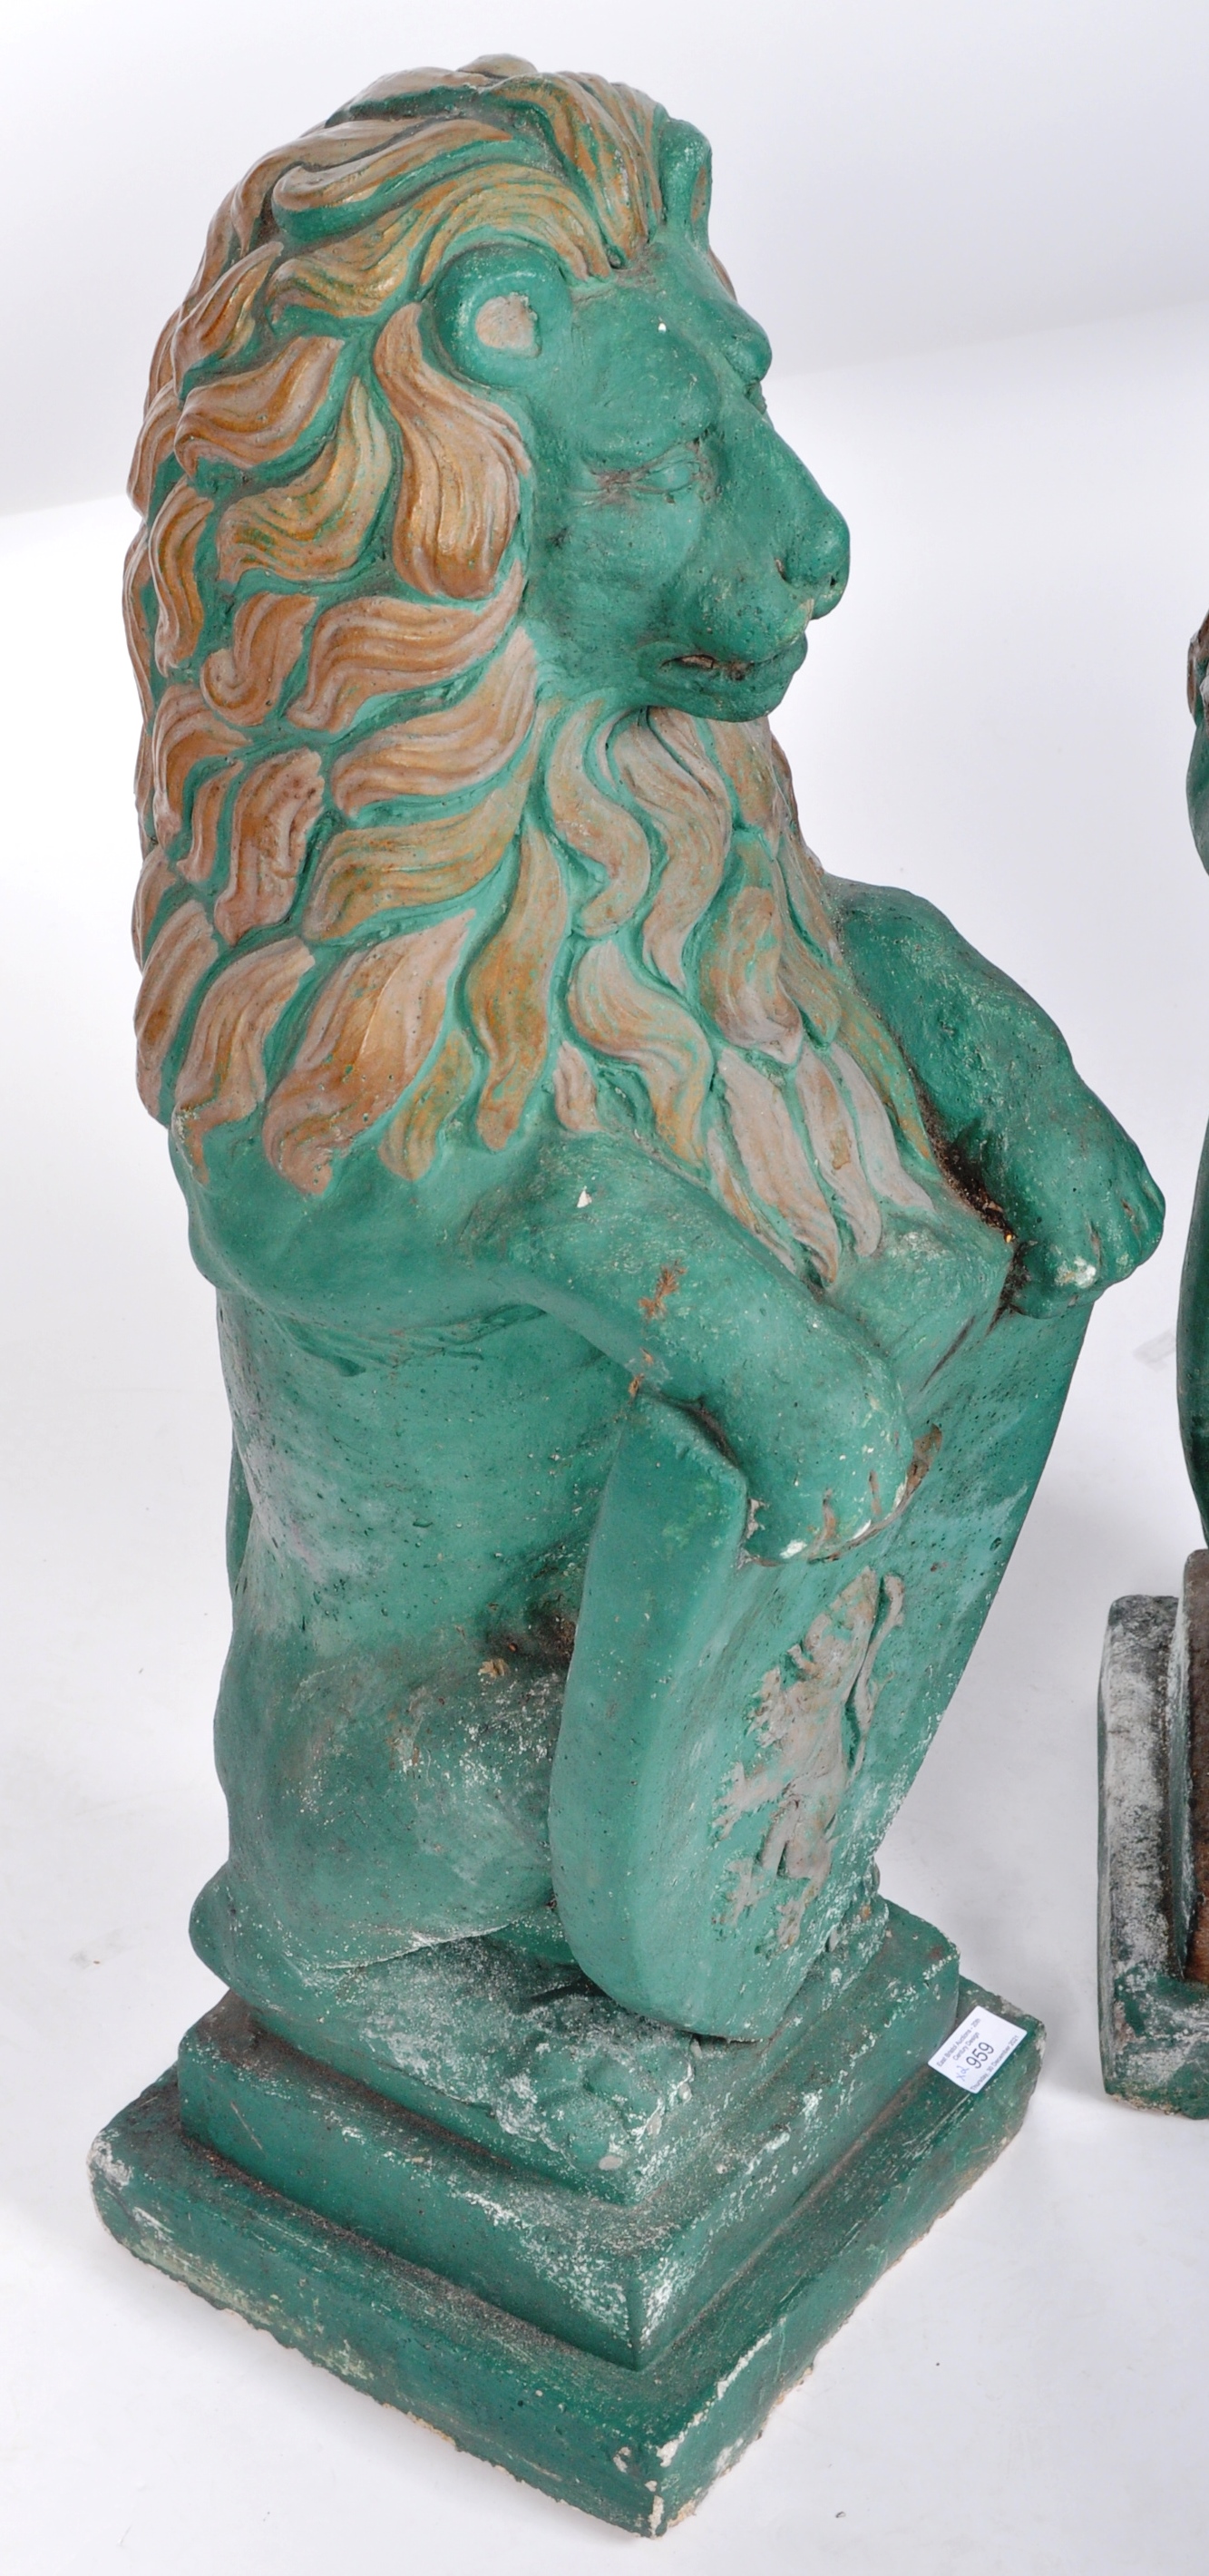 MATCHING PAIR OF PAINTED RECONSTITUTED STONE LION FIGURES - Image 3 of 12